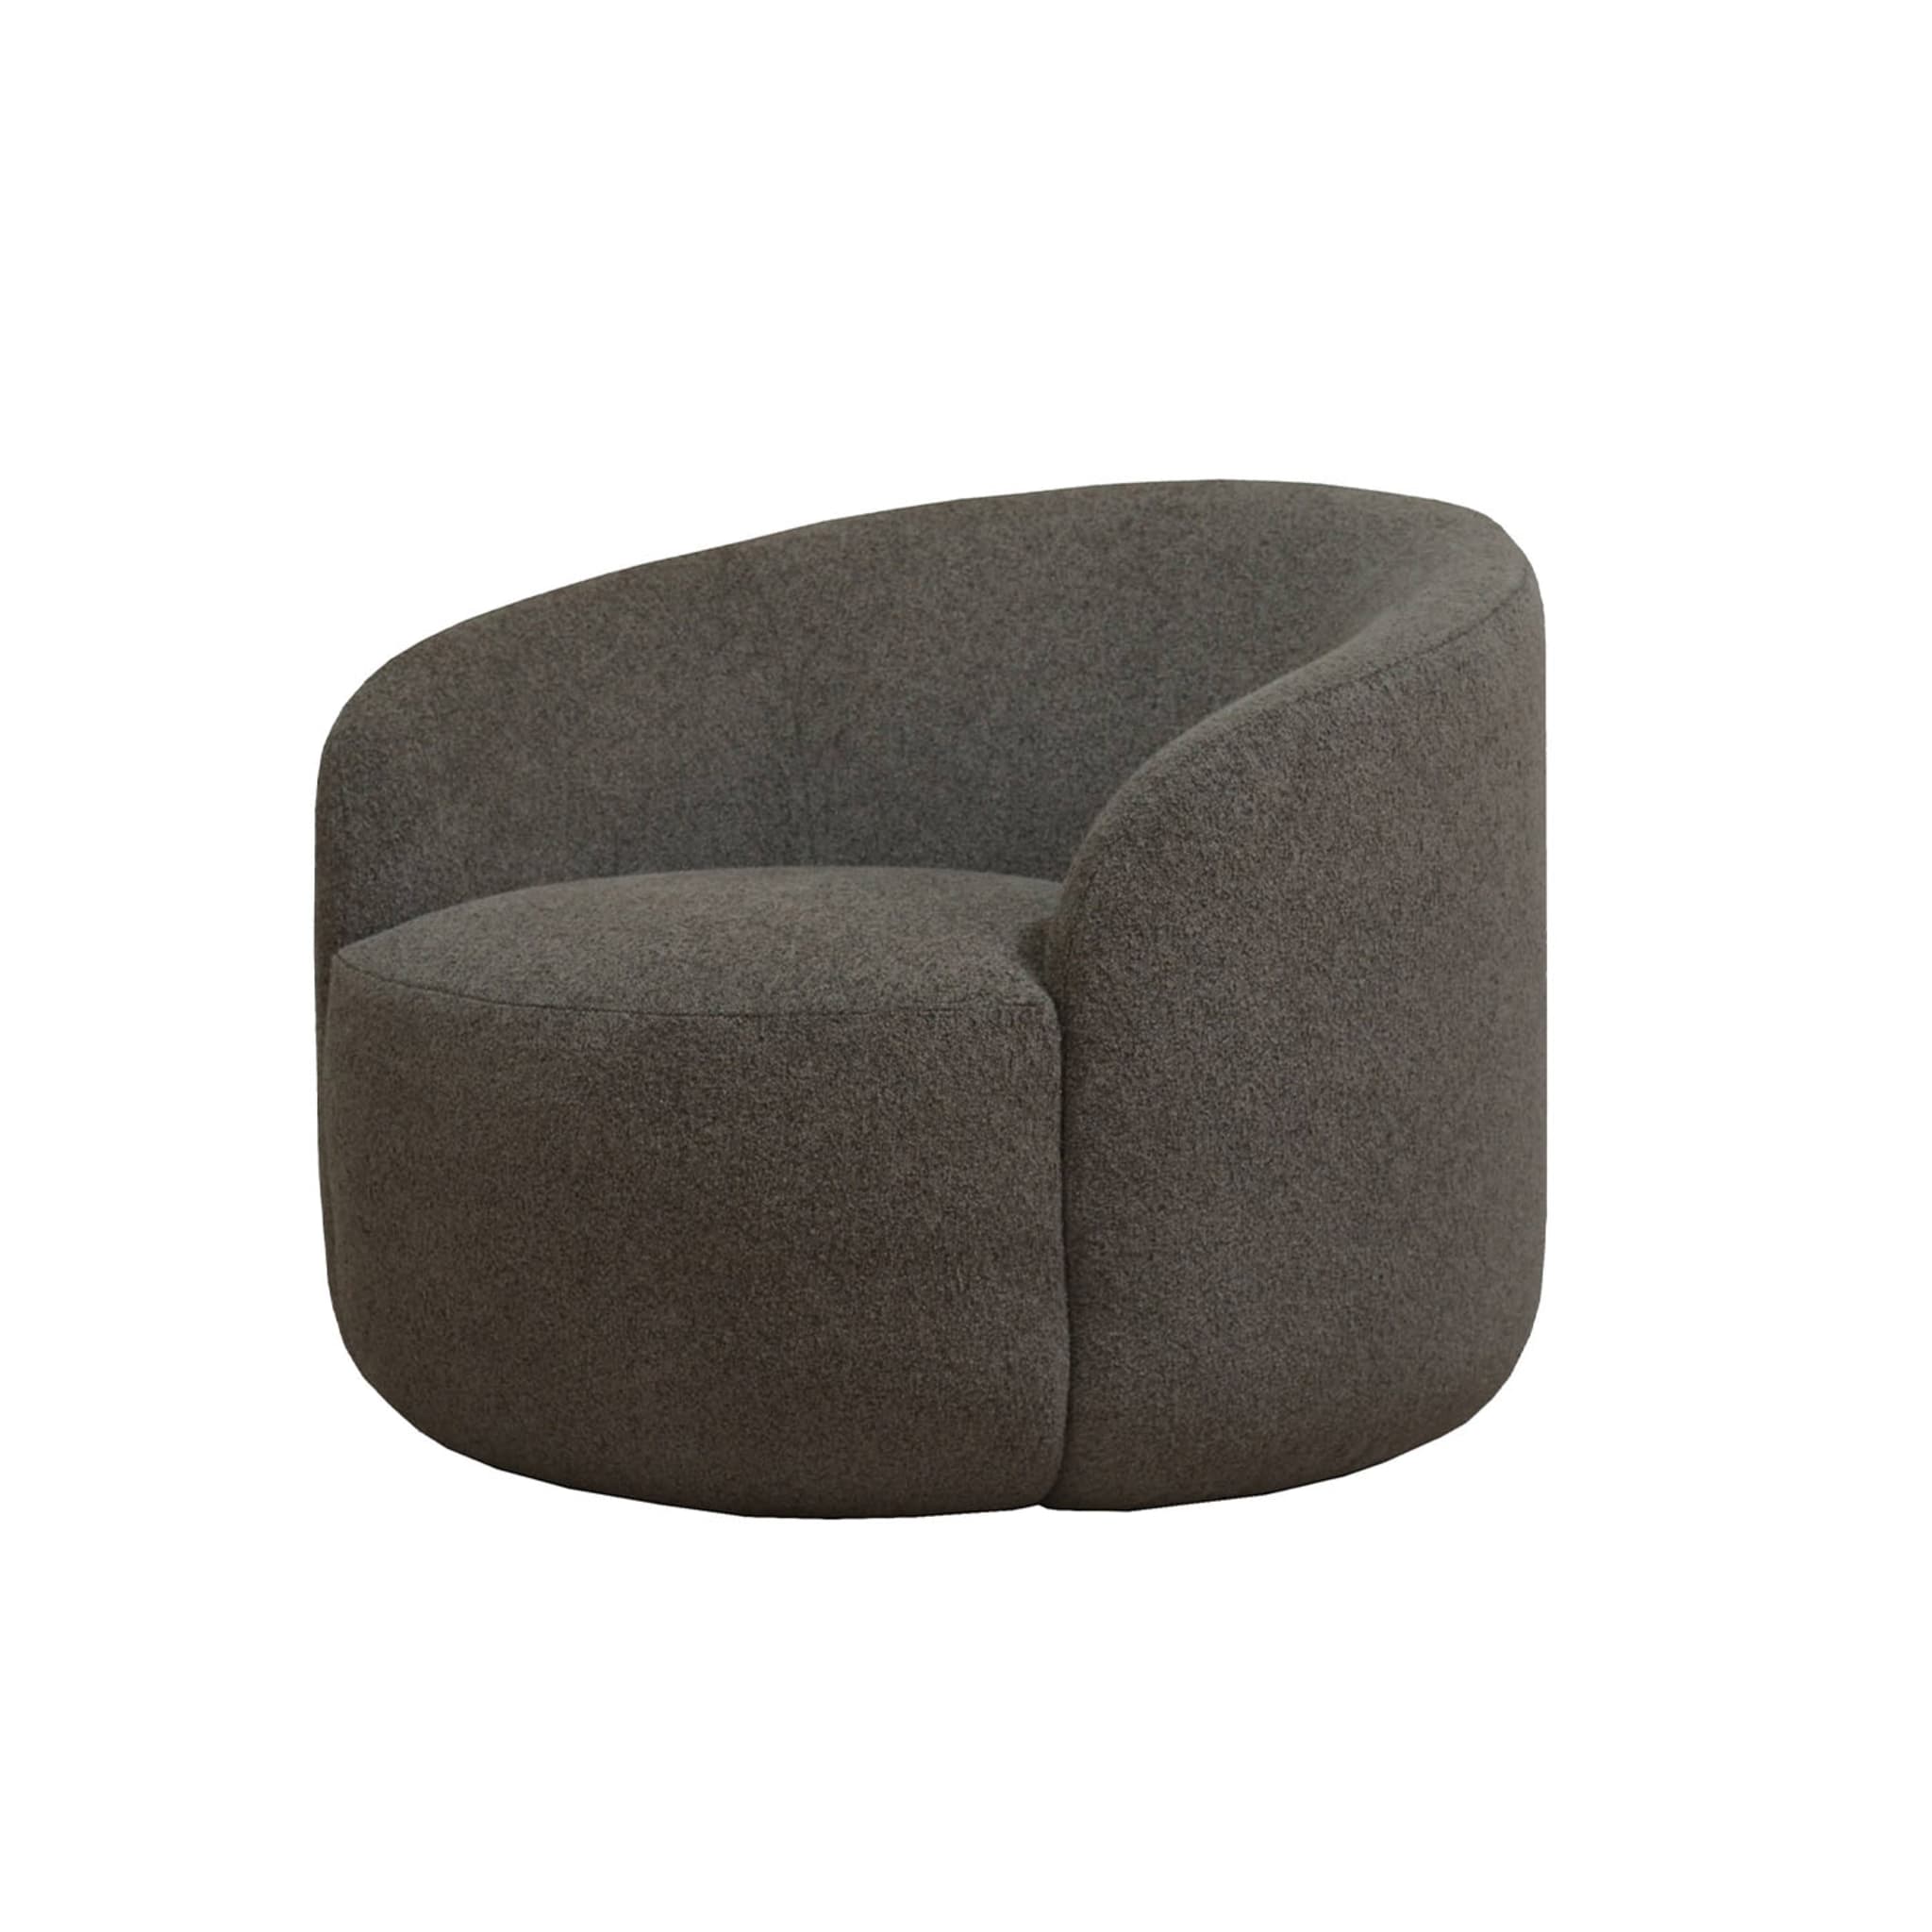 Cottonflower Lounge Armchair in Brown Fabric - Alternative view 1